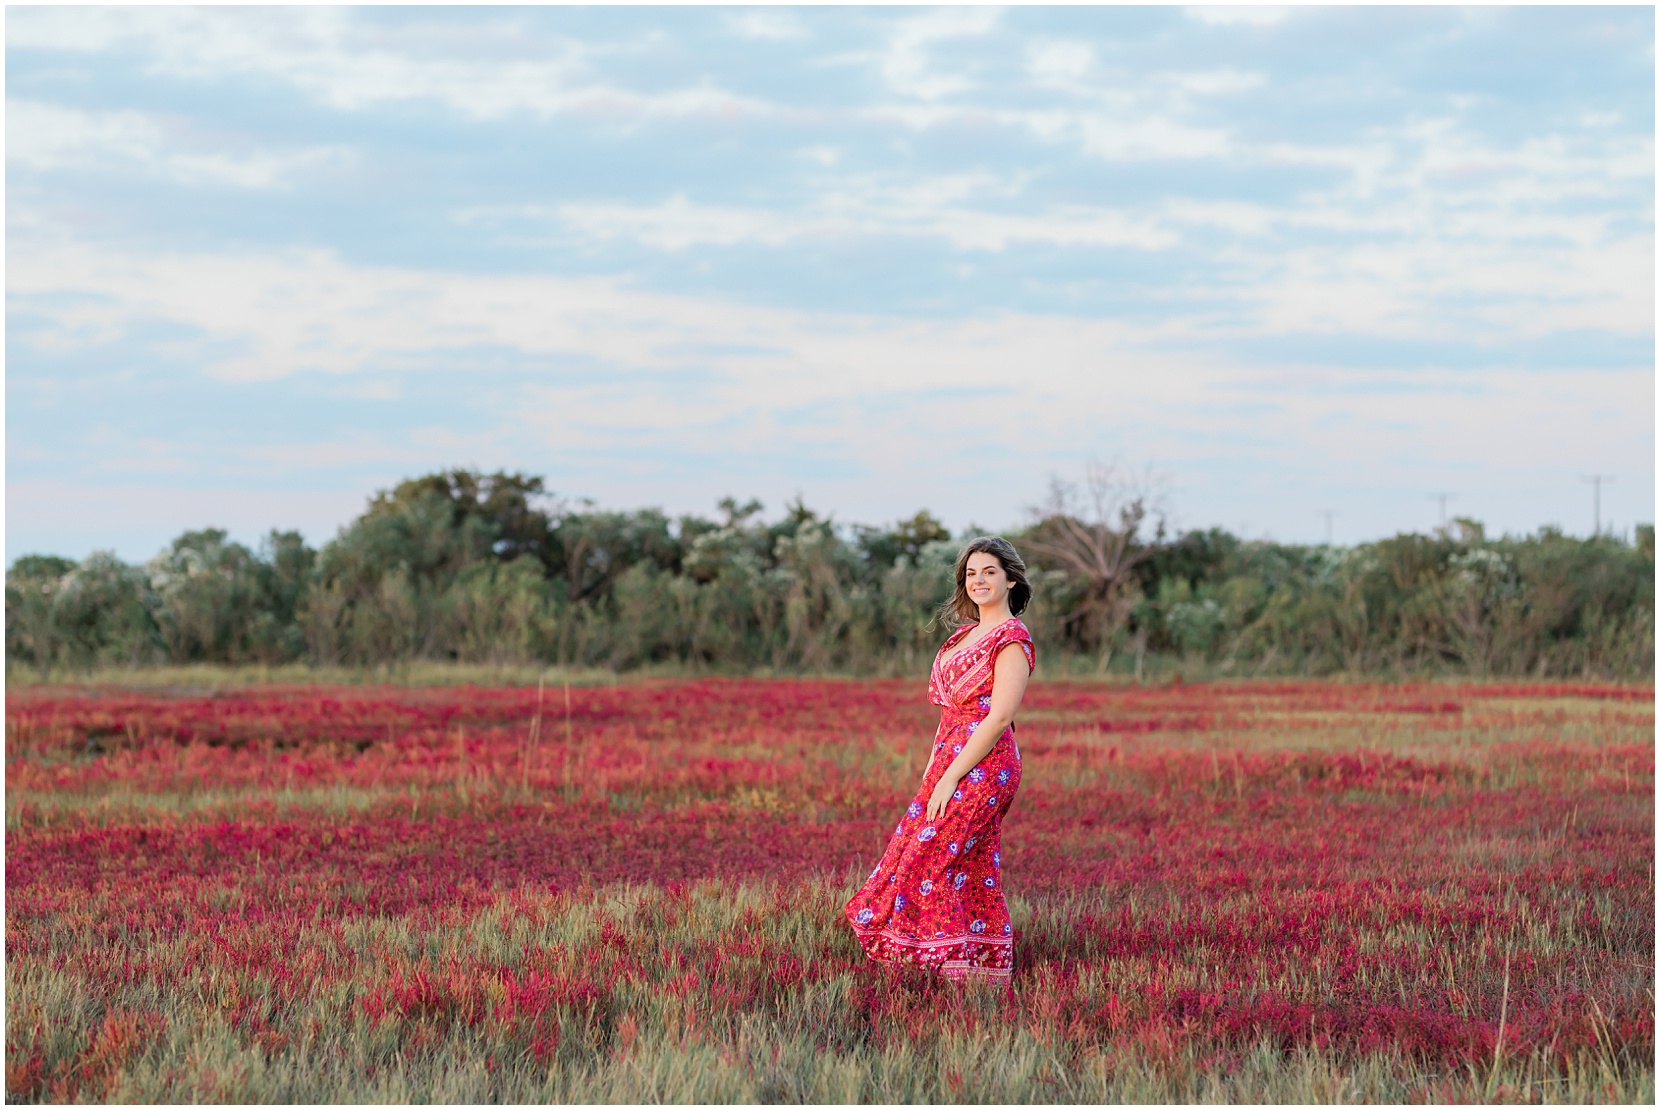 teen girl in red dress skipping through a field of red flowers near the beach in ocean city, nj